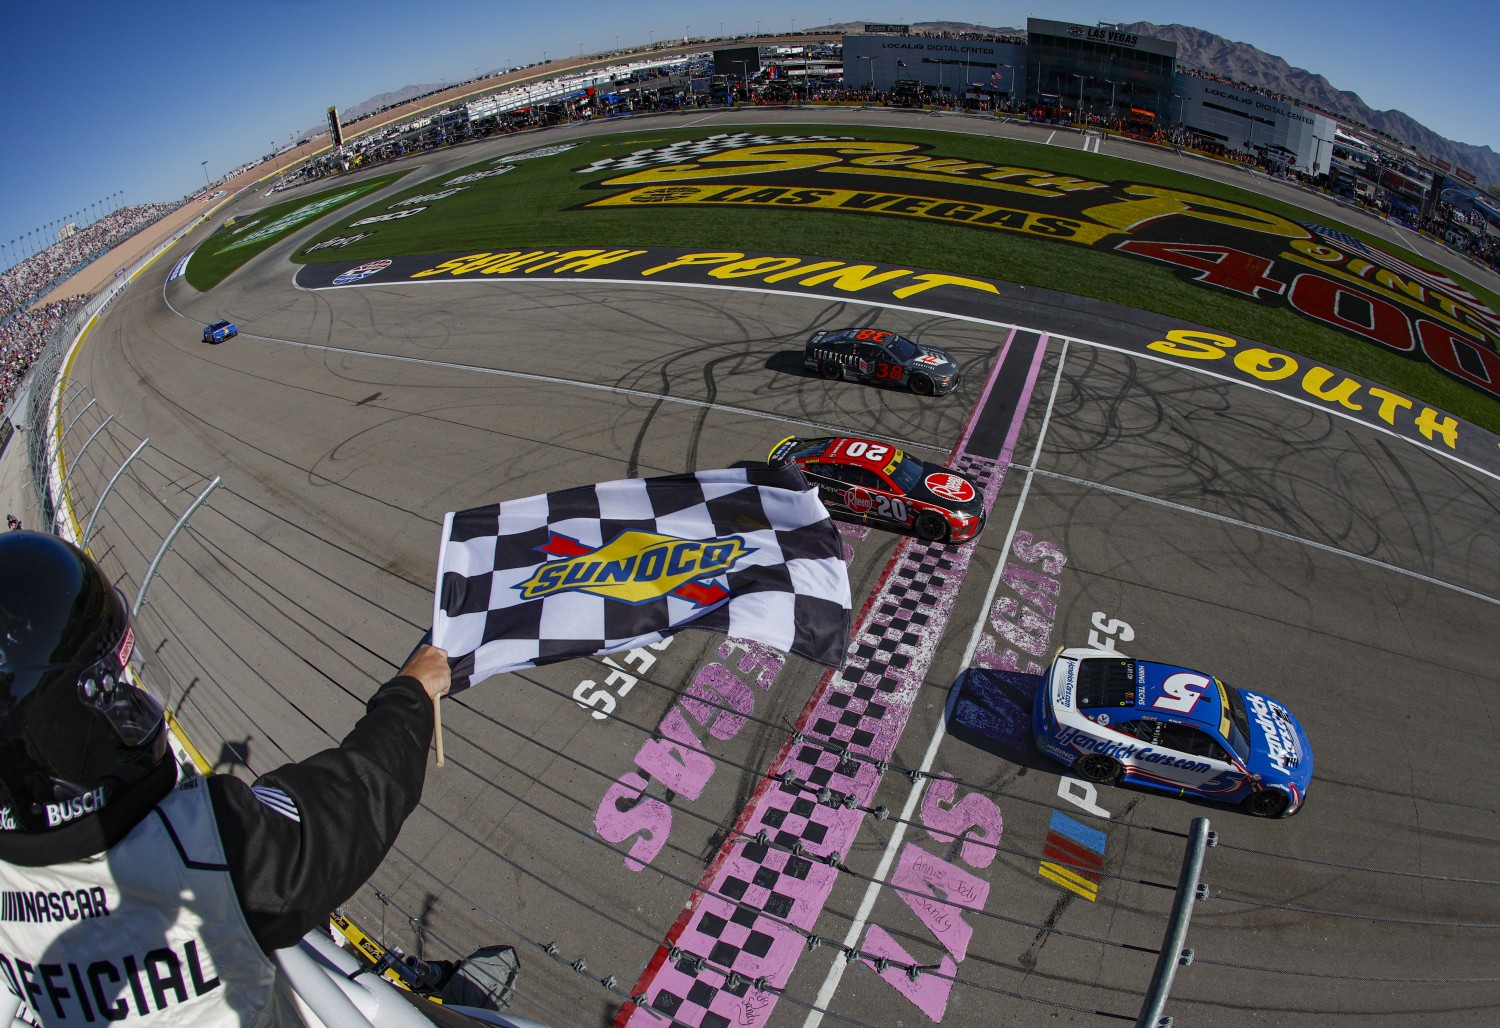 Kyle Larson, driver of the #5 HendrickCars.com Chevrolet, takes the checkered flag over Christopher Bell, driver of the #20 Rheem/Smurfit Kappa Toyota, to win the NASCAR Cup Series South Point 400 at Las Vegas Motor Speedway on October 15, 2023 in Las Vegas, Nevada. (Photo by Sean Gardner/Getty Images)